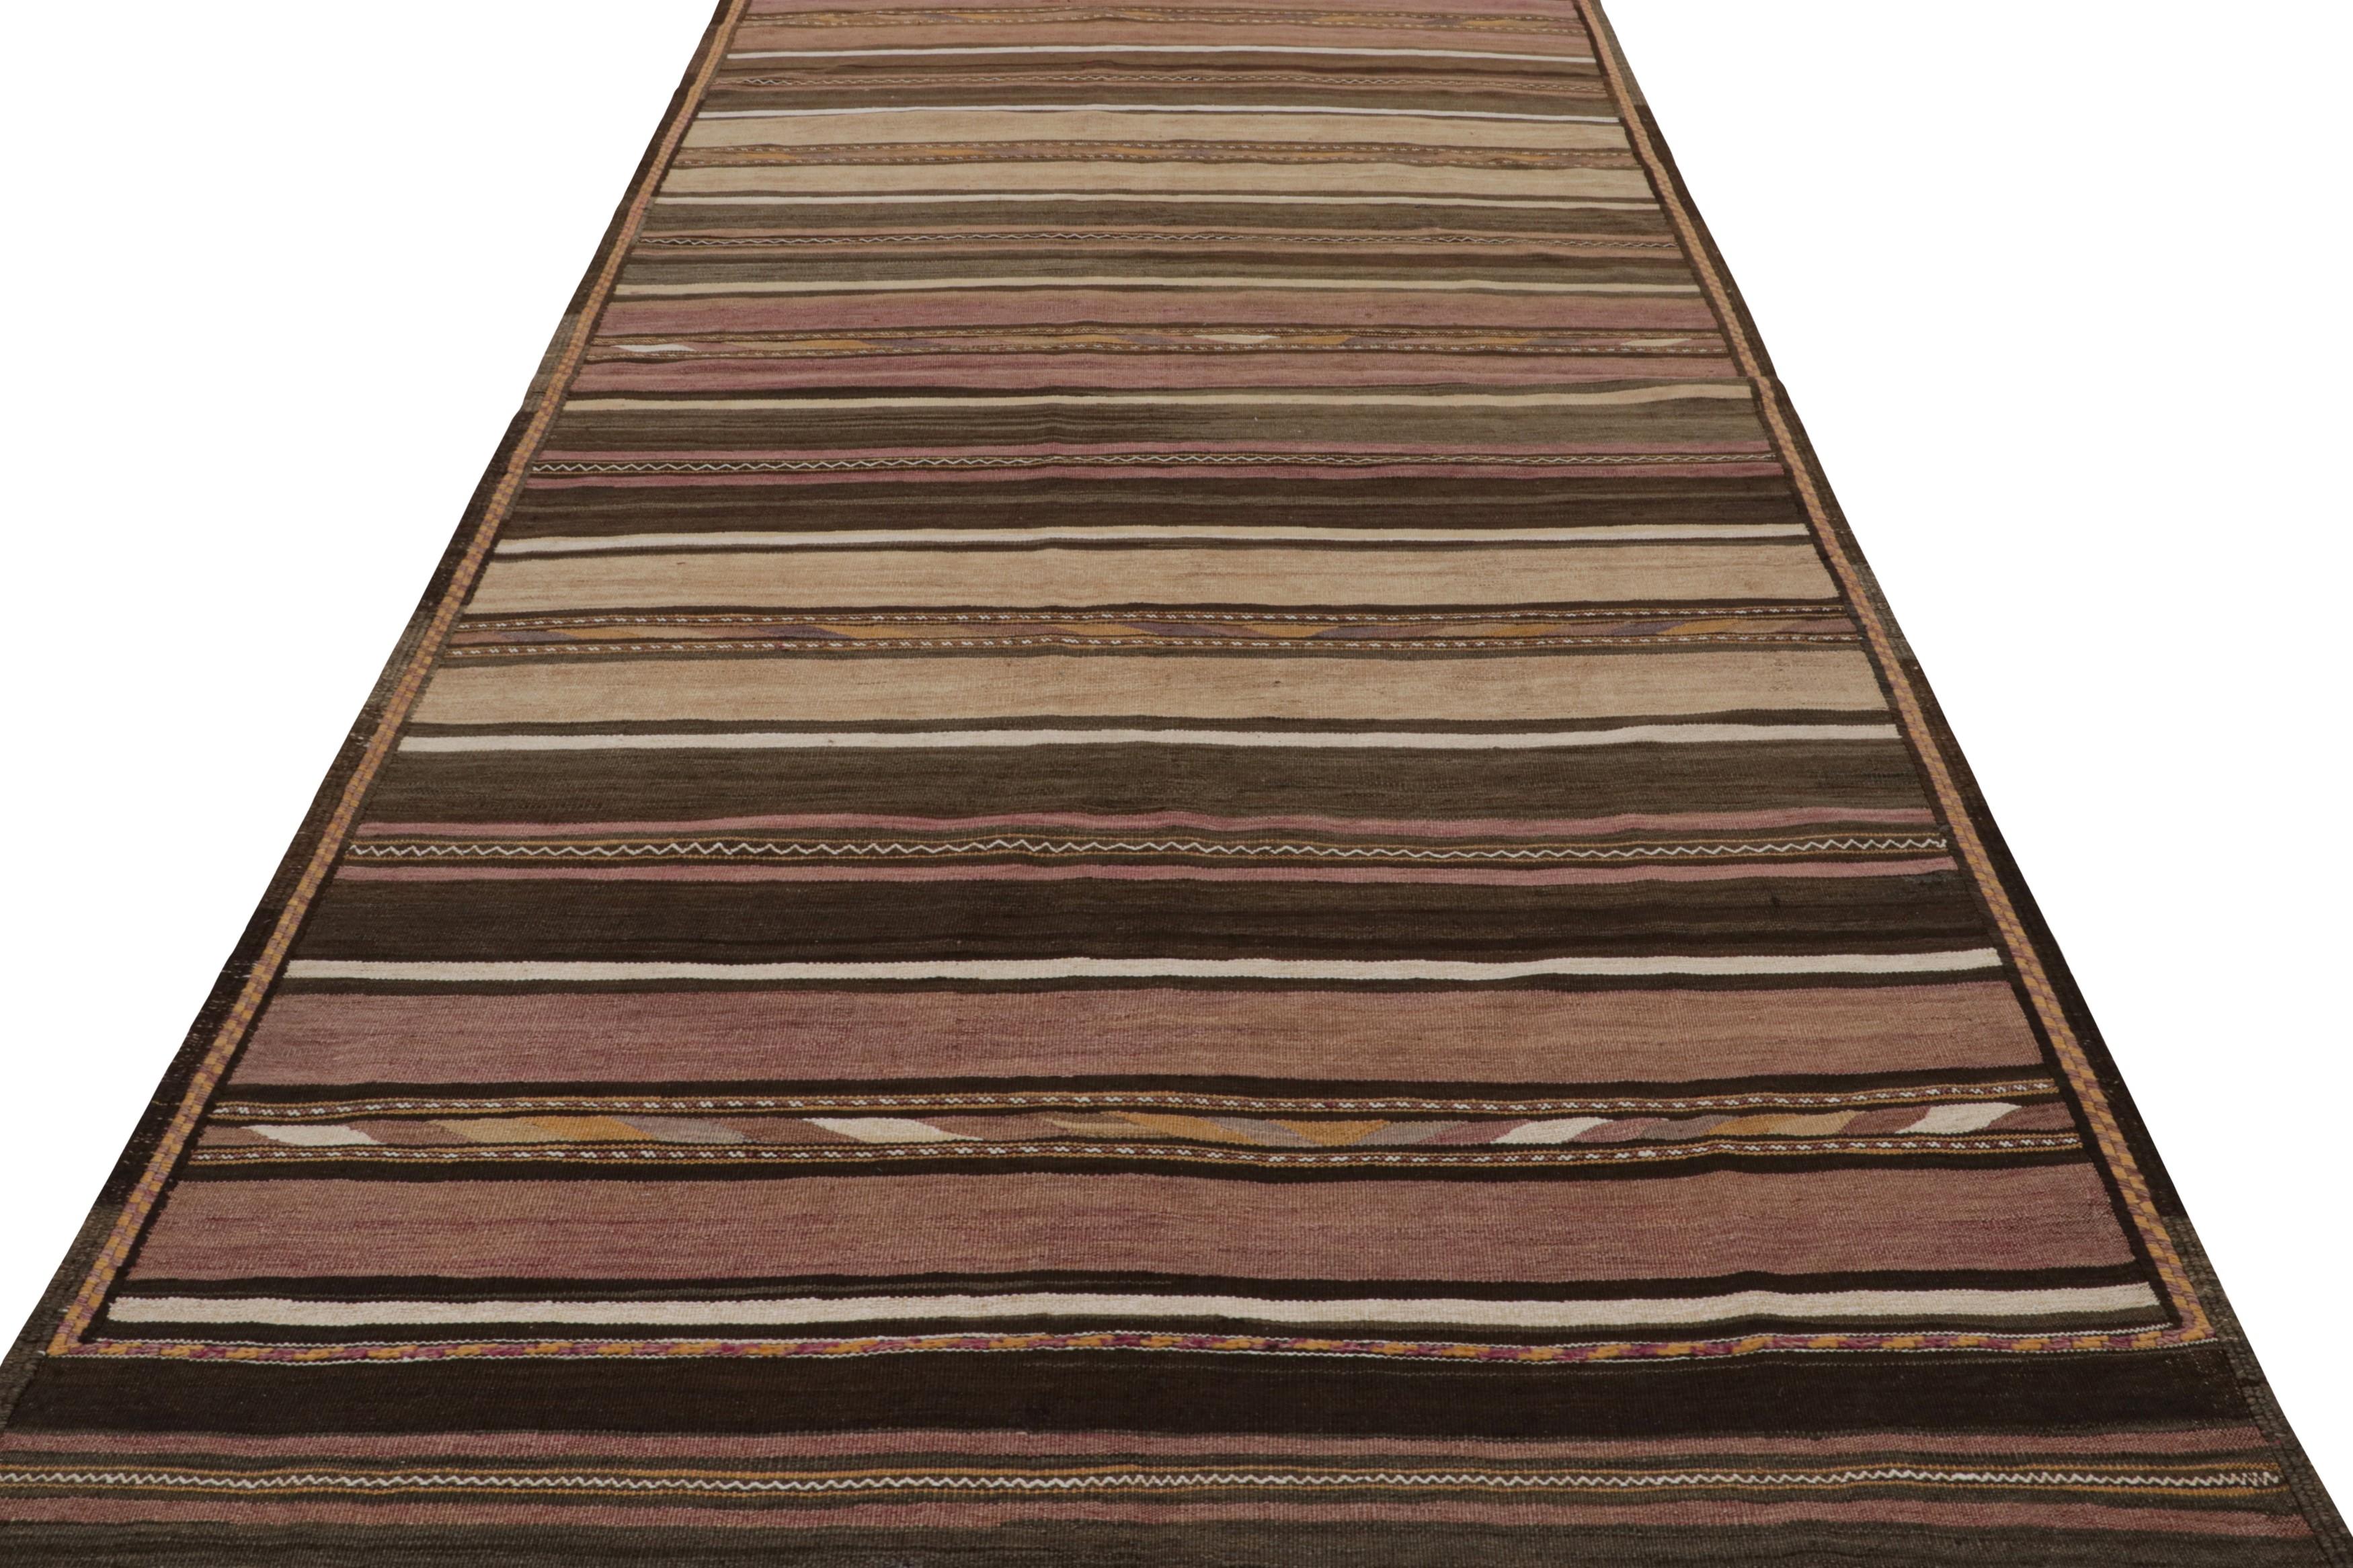 Hand-Woven Vintage Afghan Tribal Kilim with Brown, Red, White Stripes by Rug & Kilim For Sale